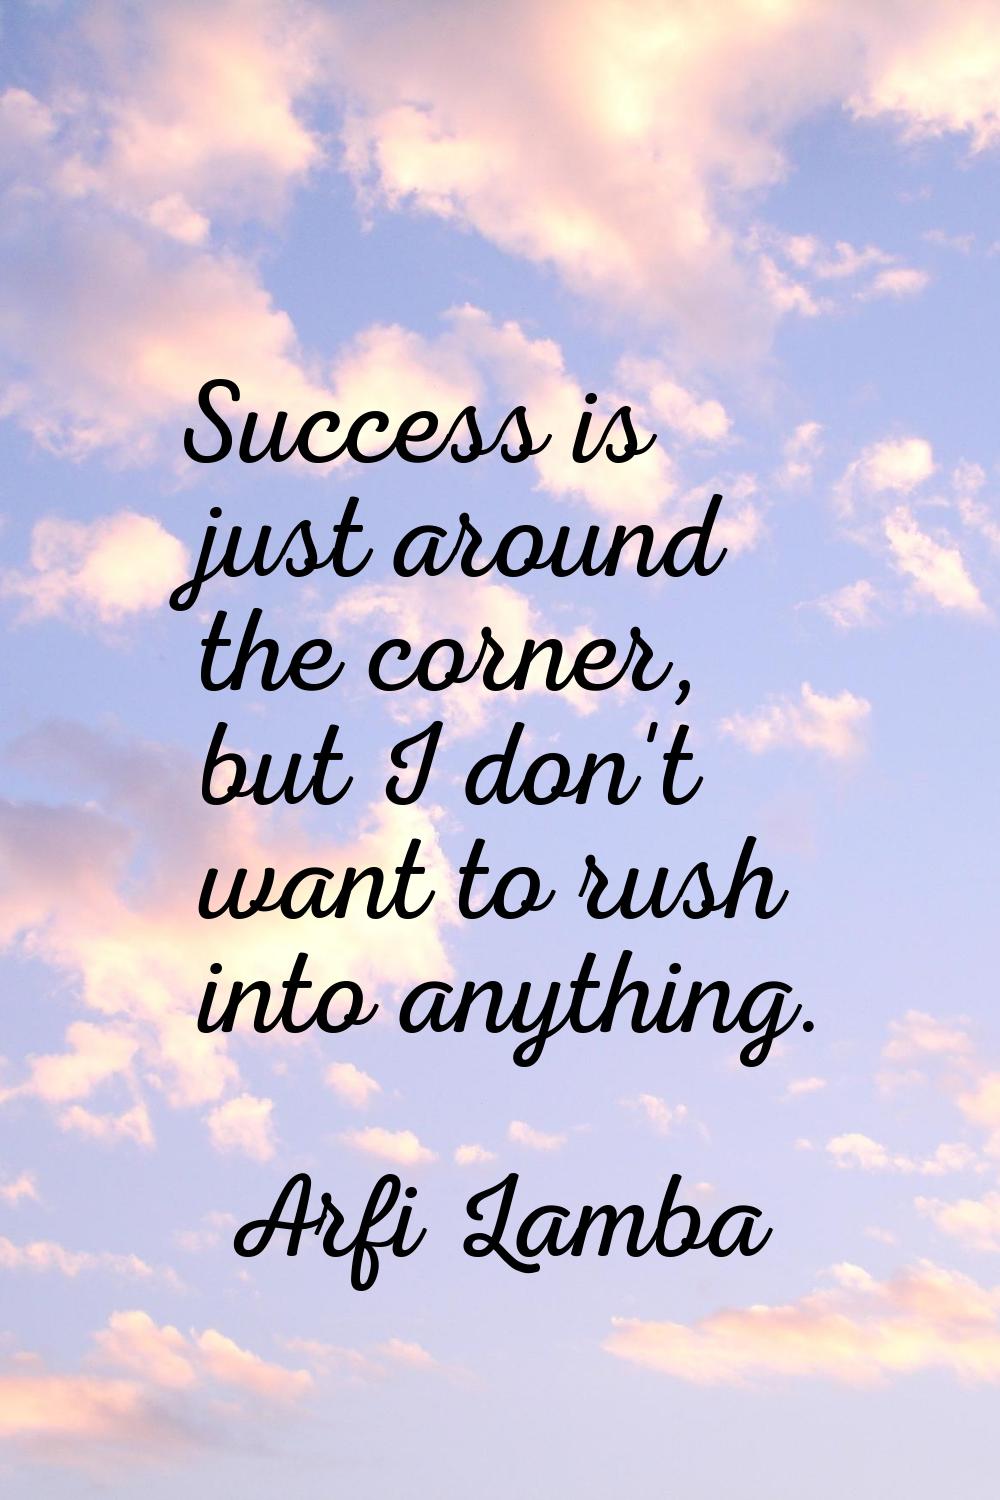 Success is just around the corner, but I don't want to rush into anything.